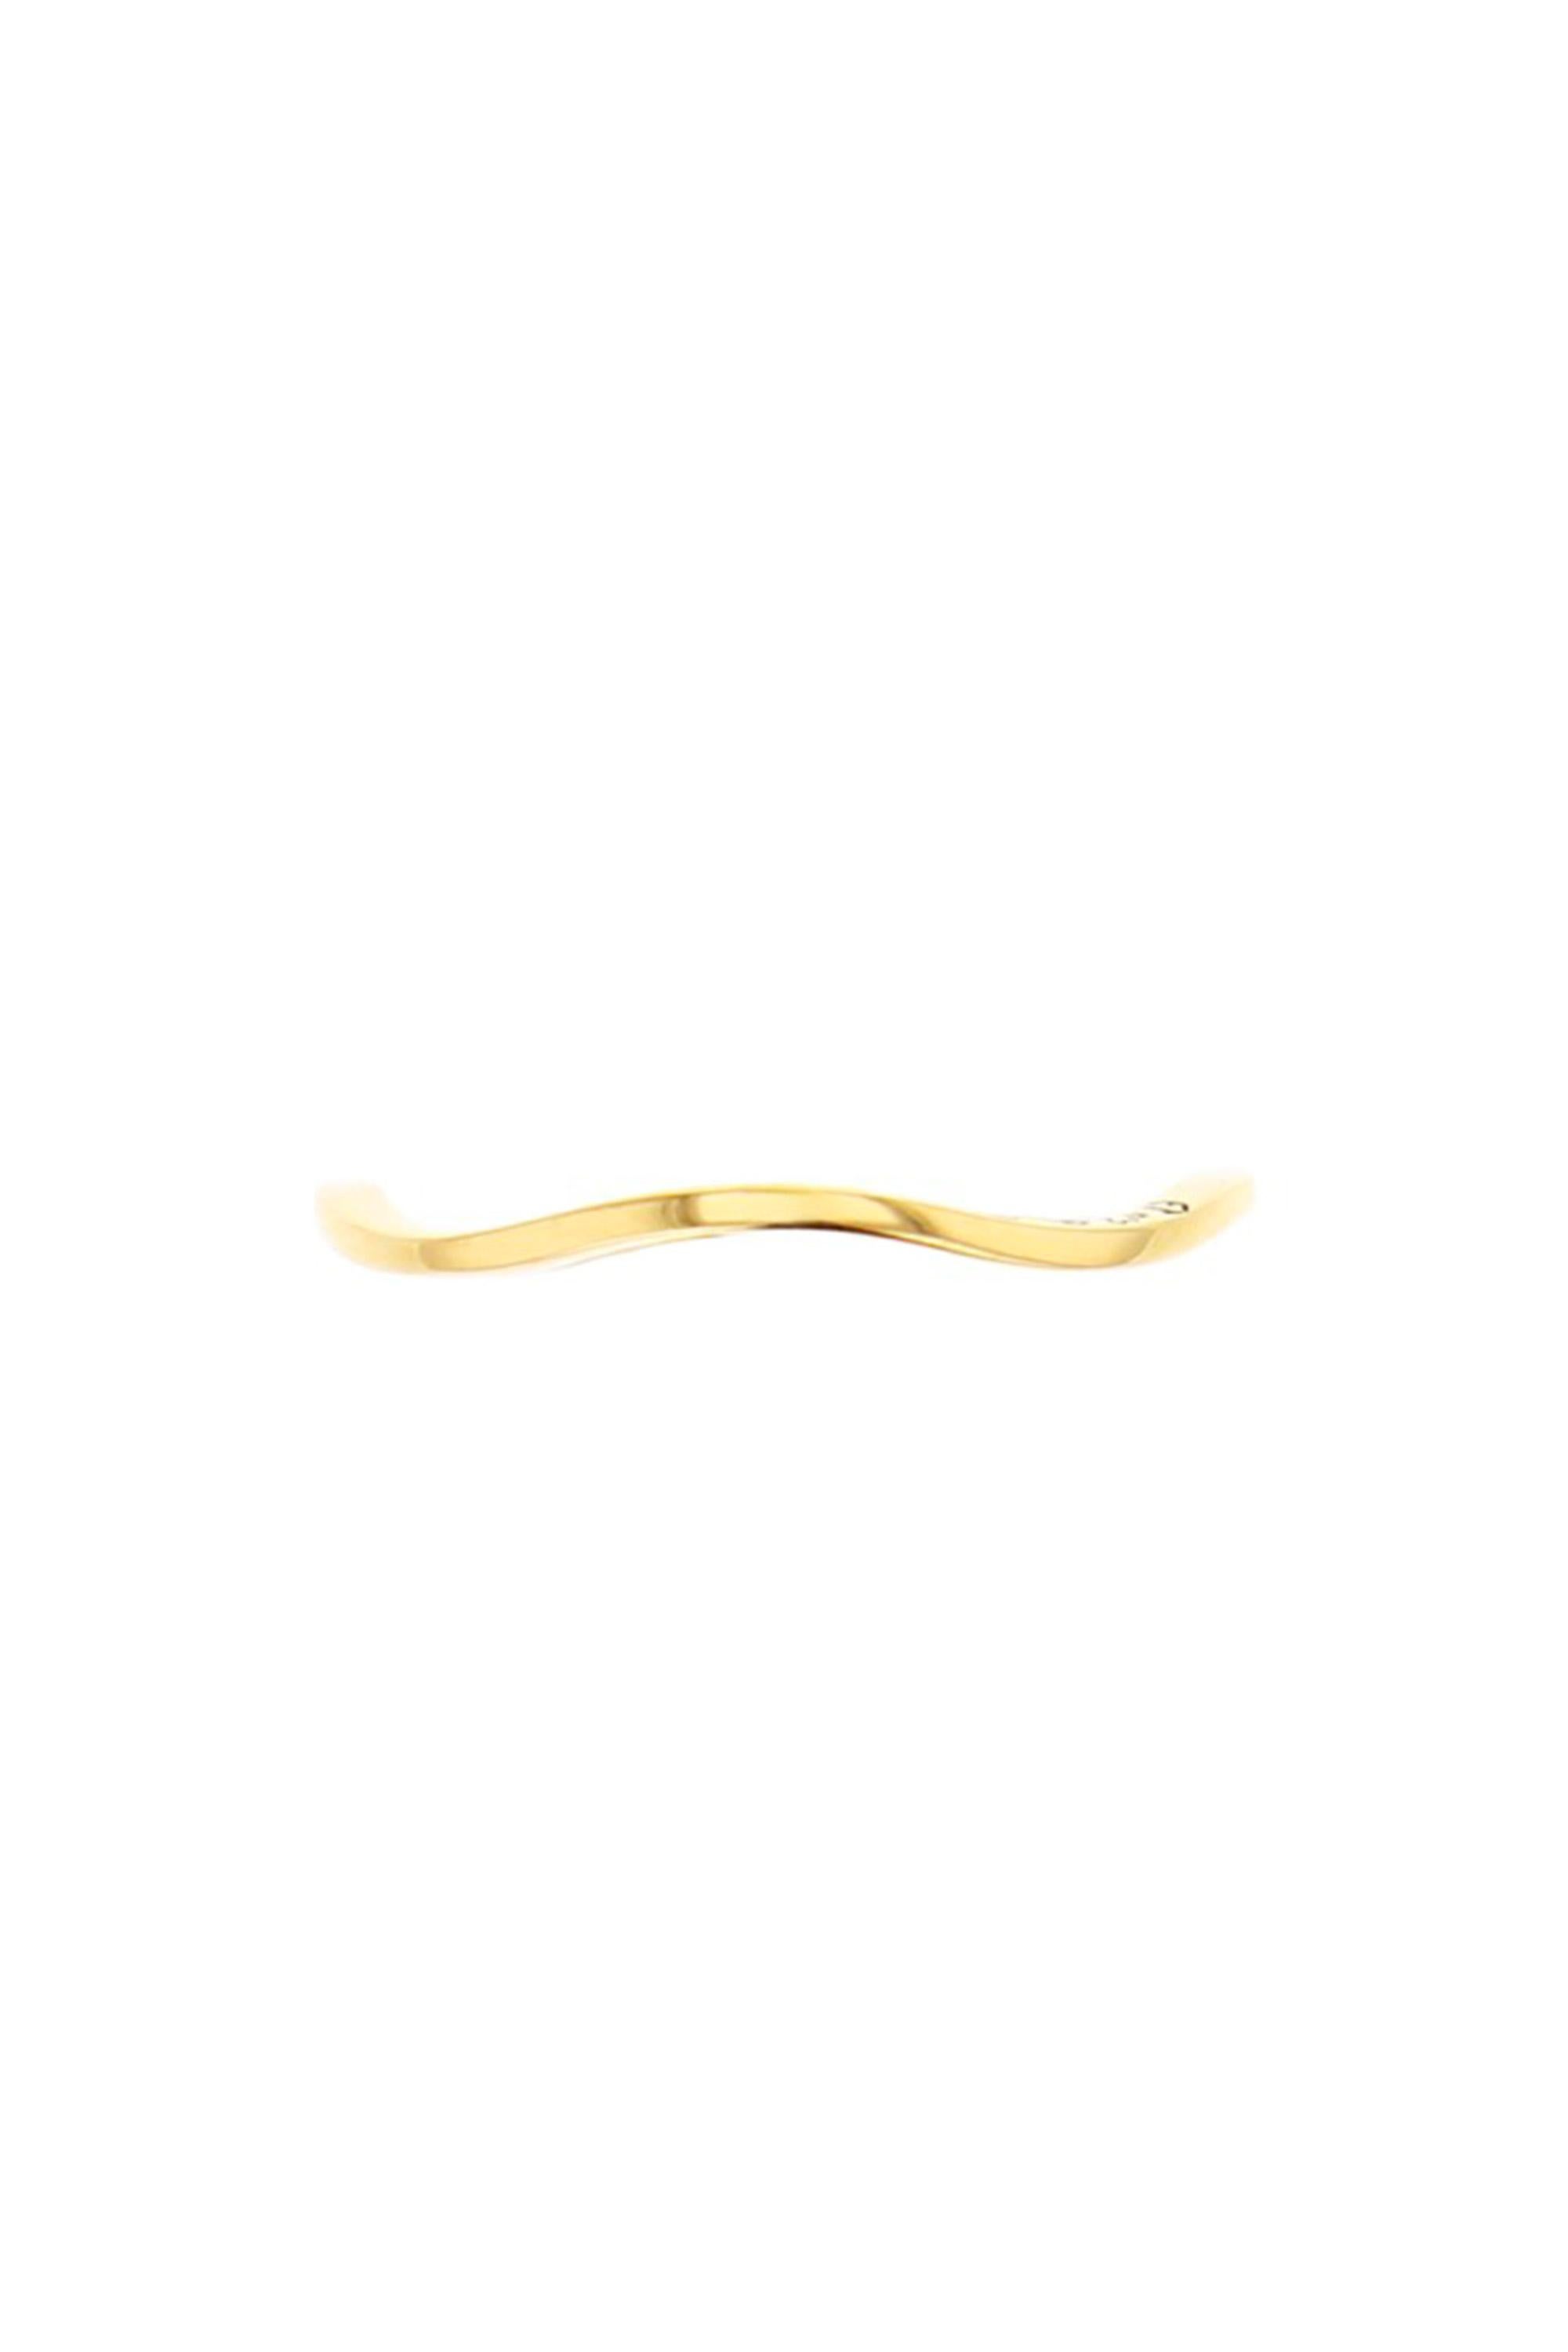 Curved wedding ring in yellow gold. 
Can be paired or stacked with other rings from the same collection.

Details:
18k Yellow Gold: 1.3 g
Made in France